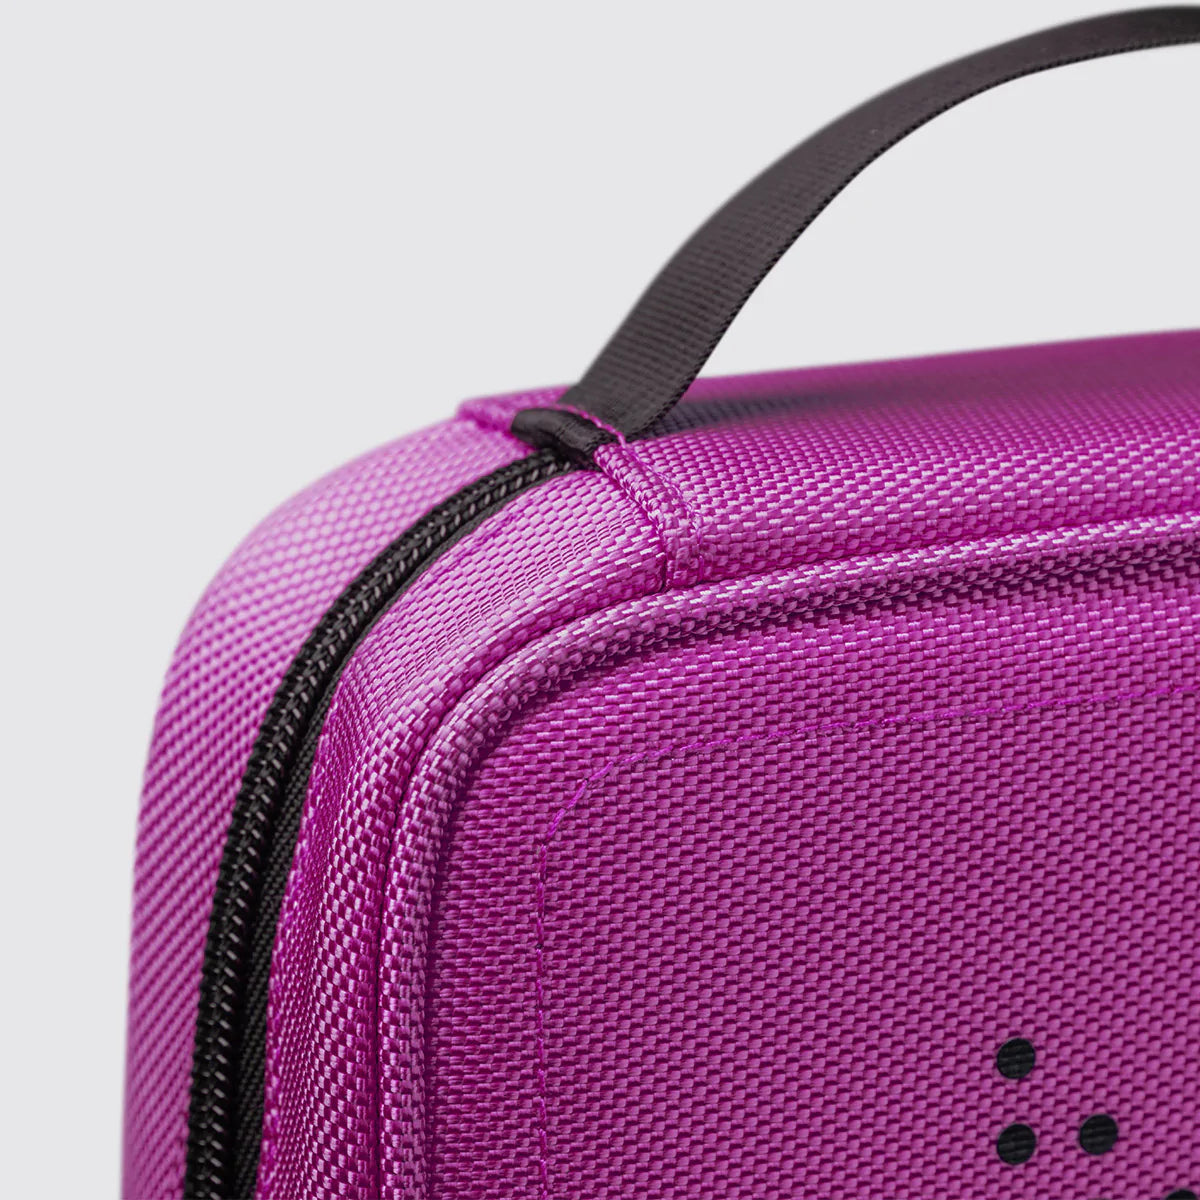 Carrying Case - Purple